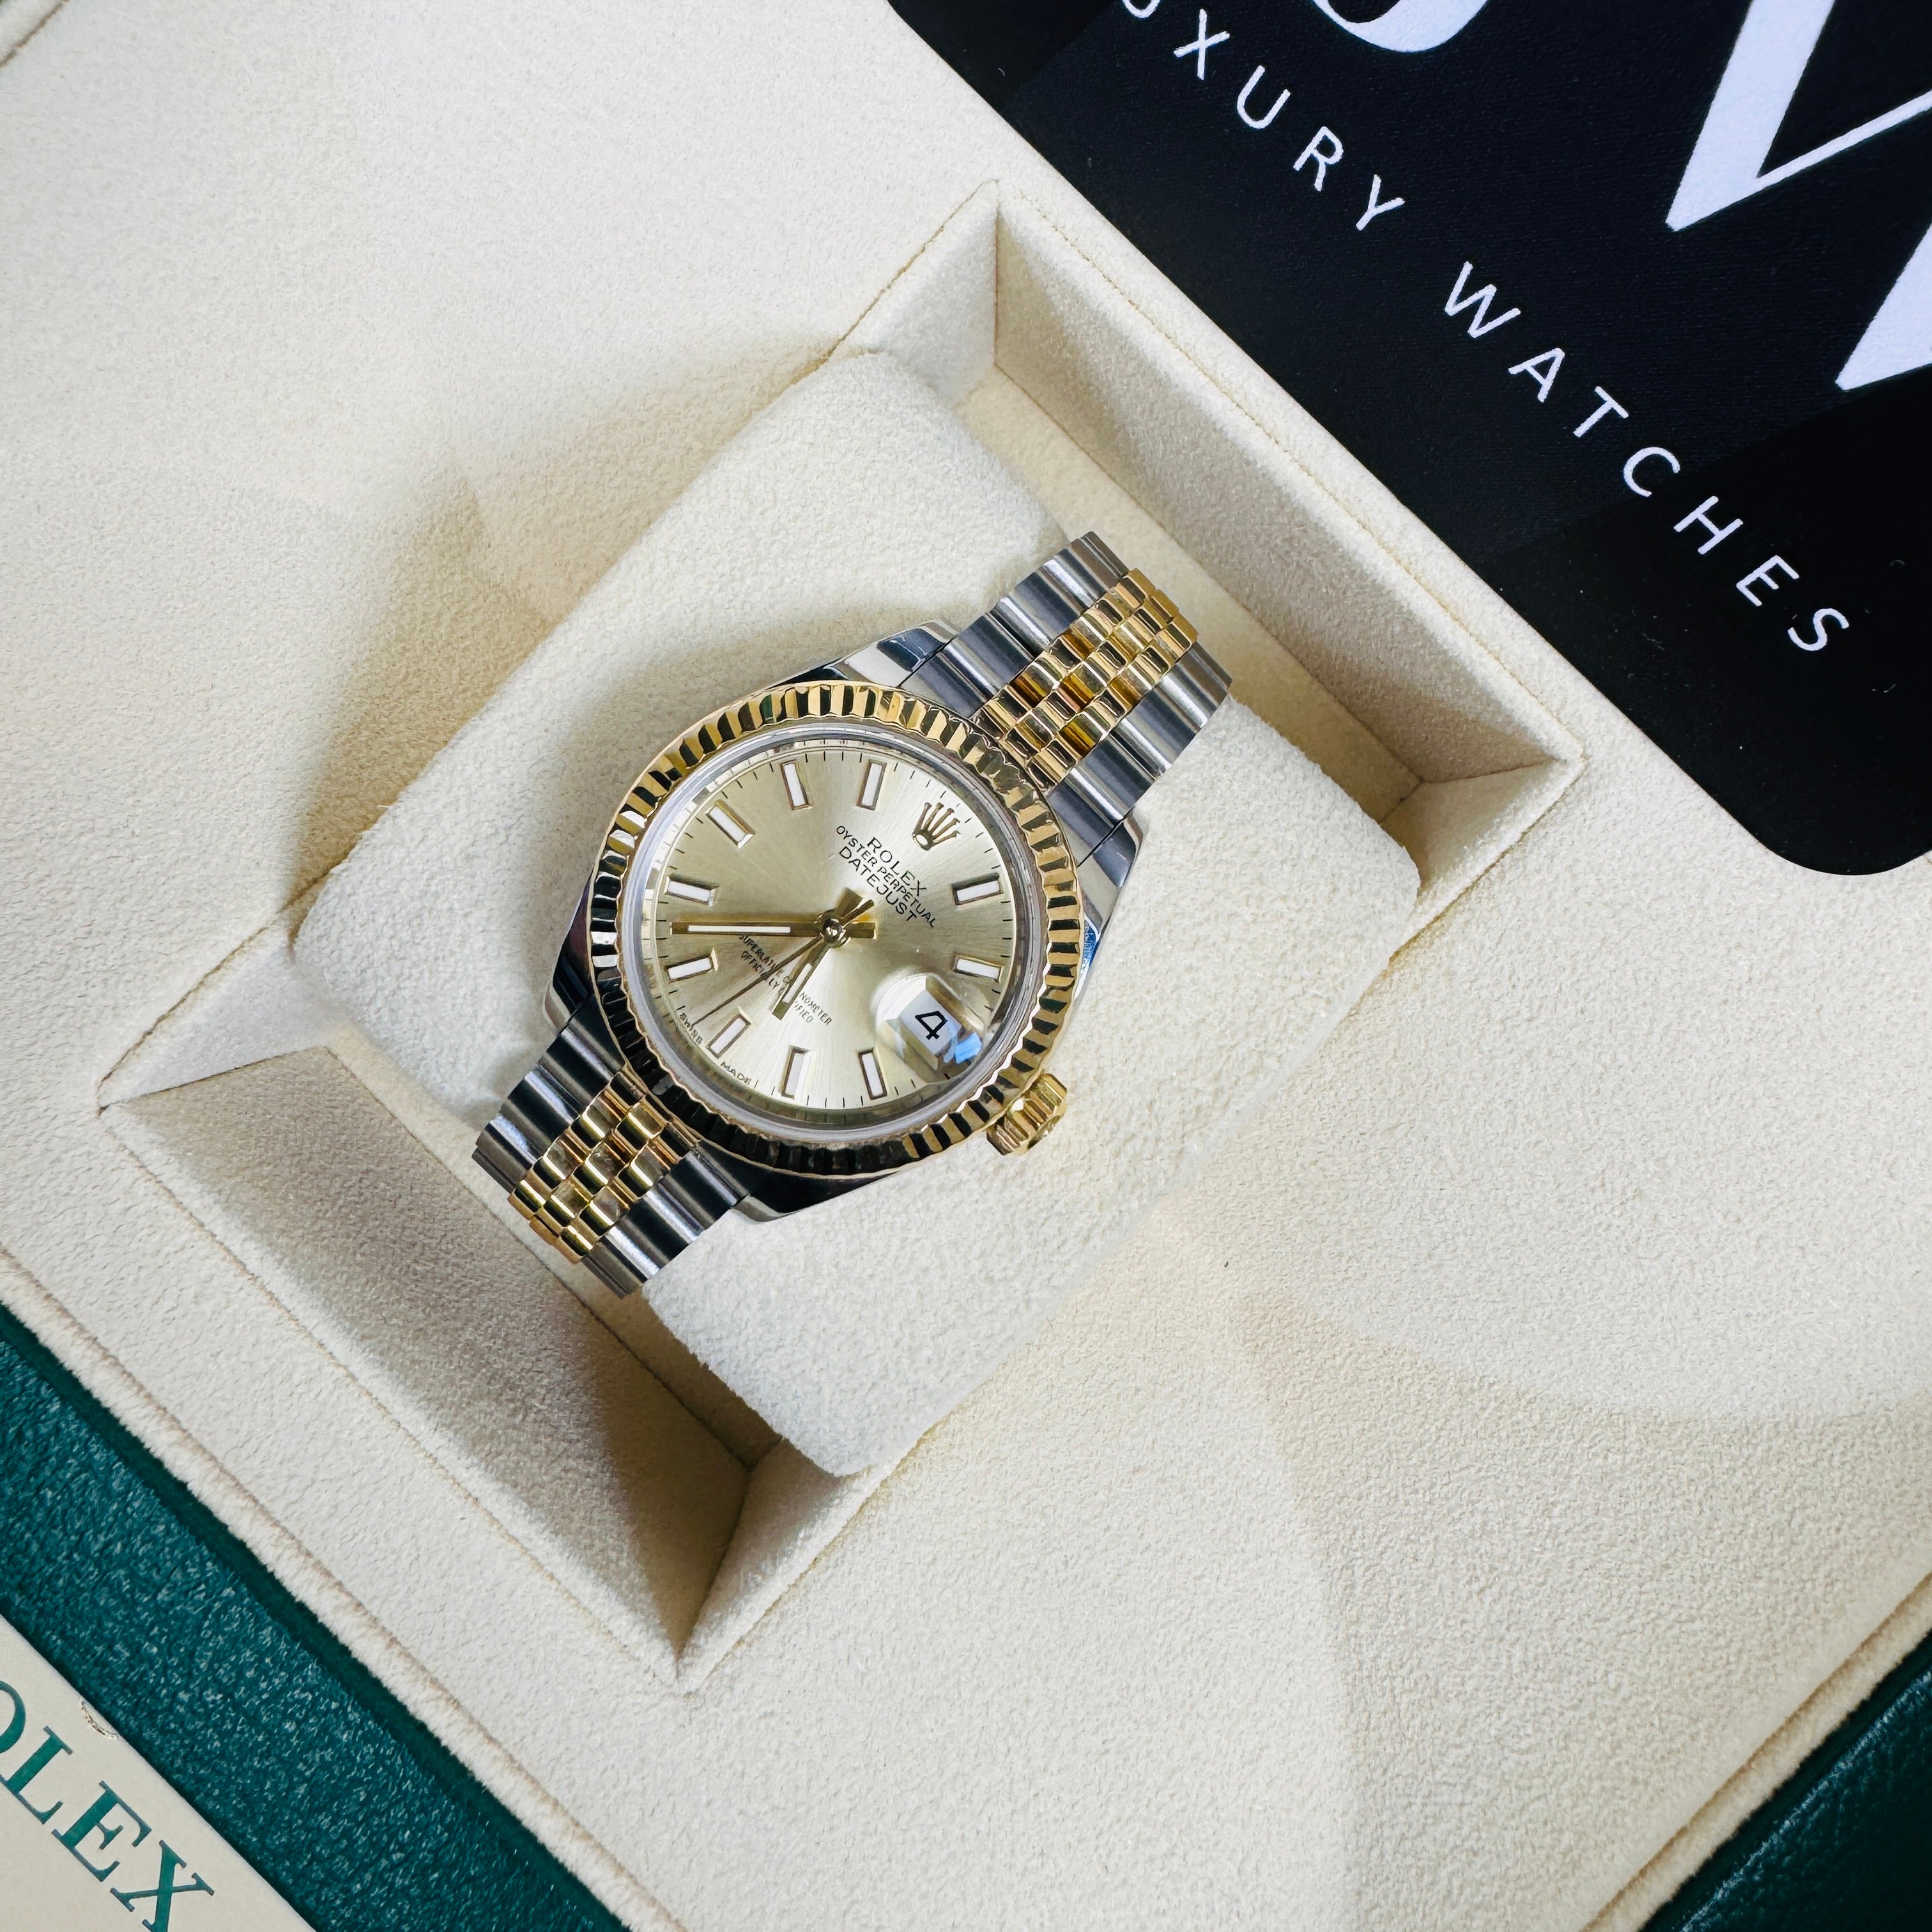 Rolex Lady-Datejust 28mm 279173 Champagne Dial